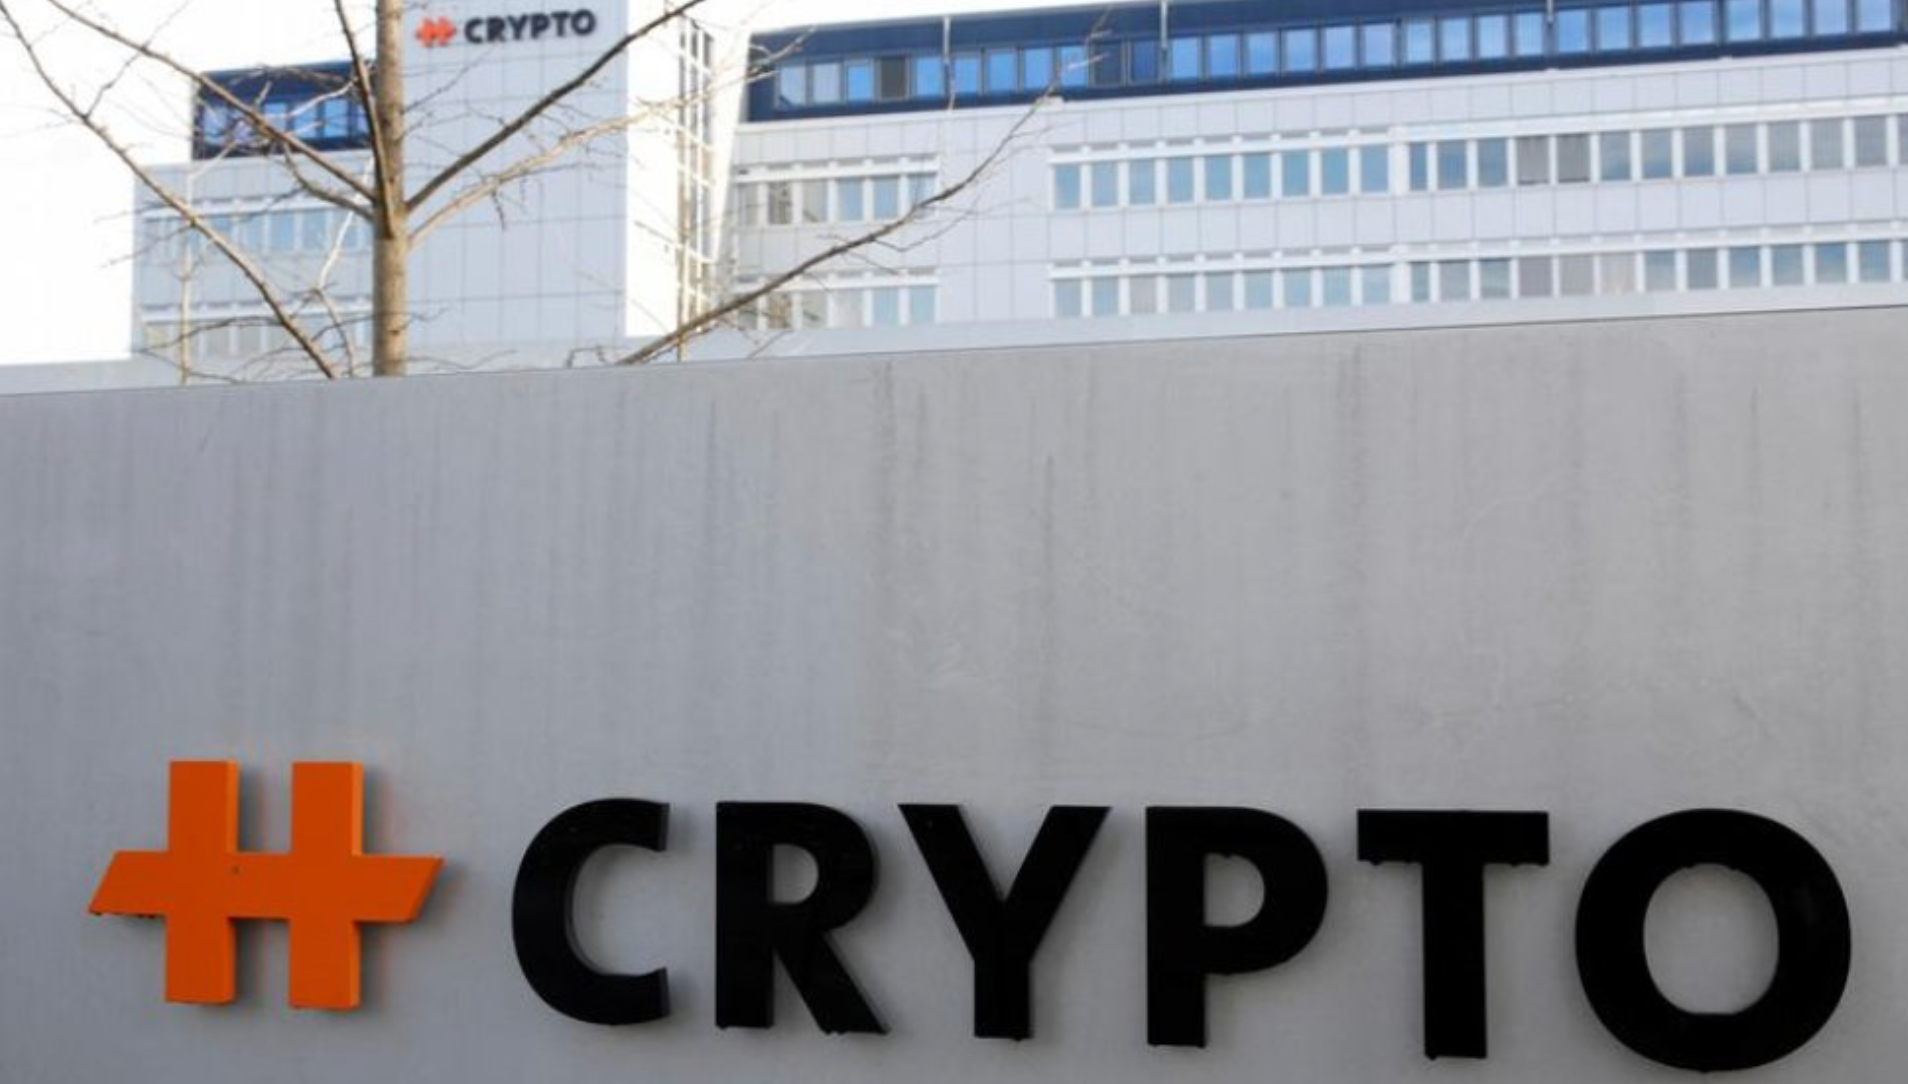 image of crypto AG building and logo